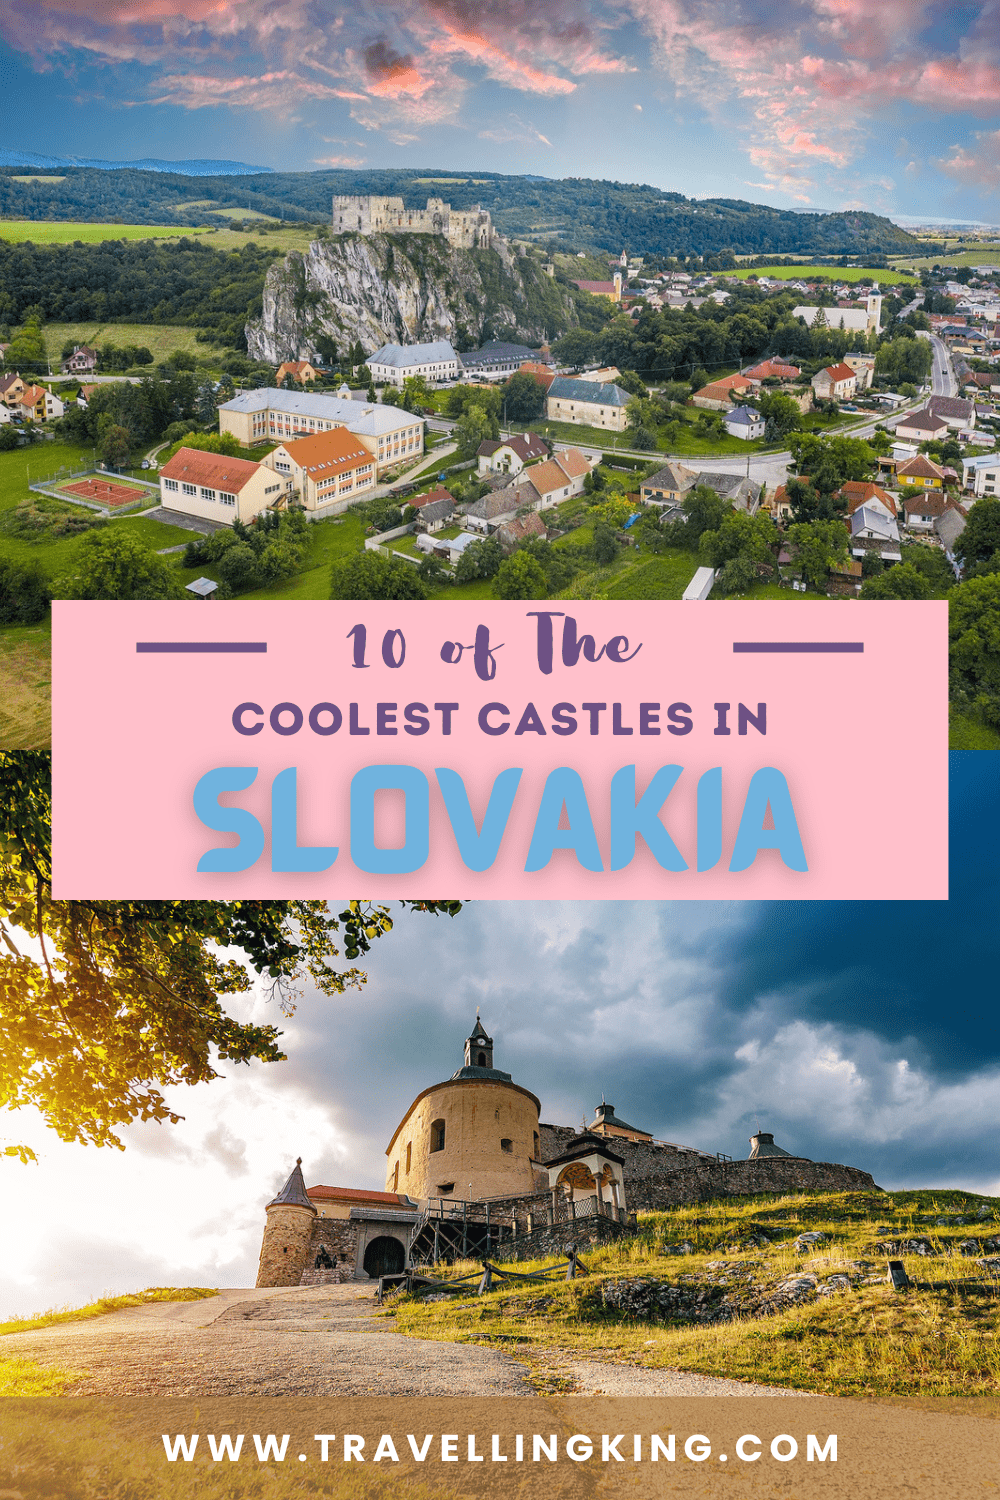 10 of The Coolest Castles in Slovakia